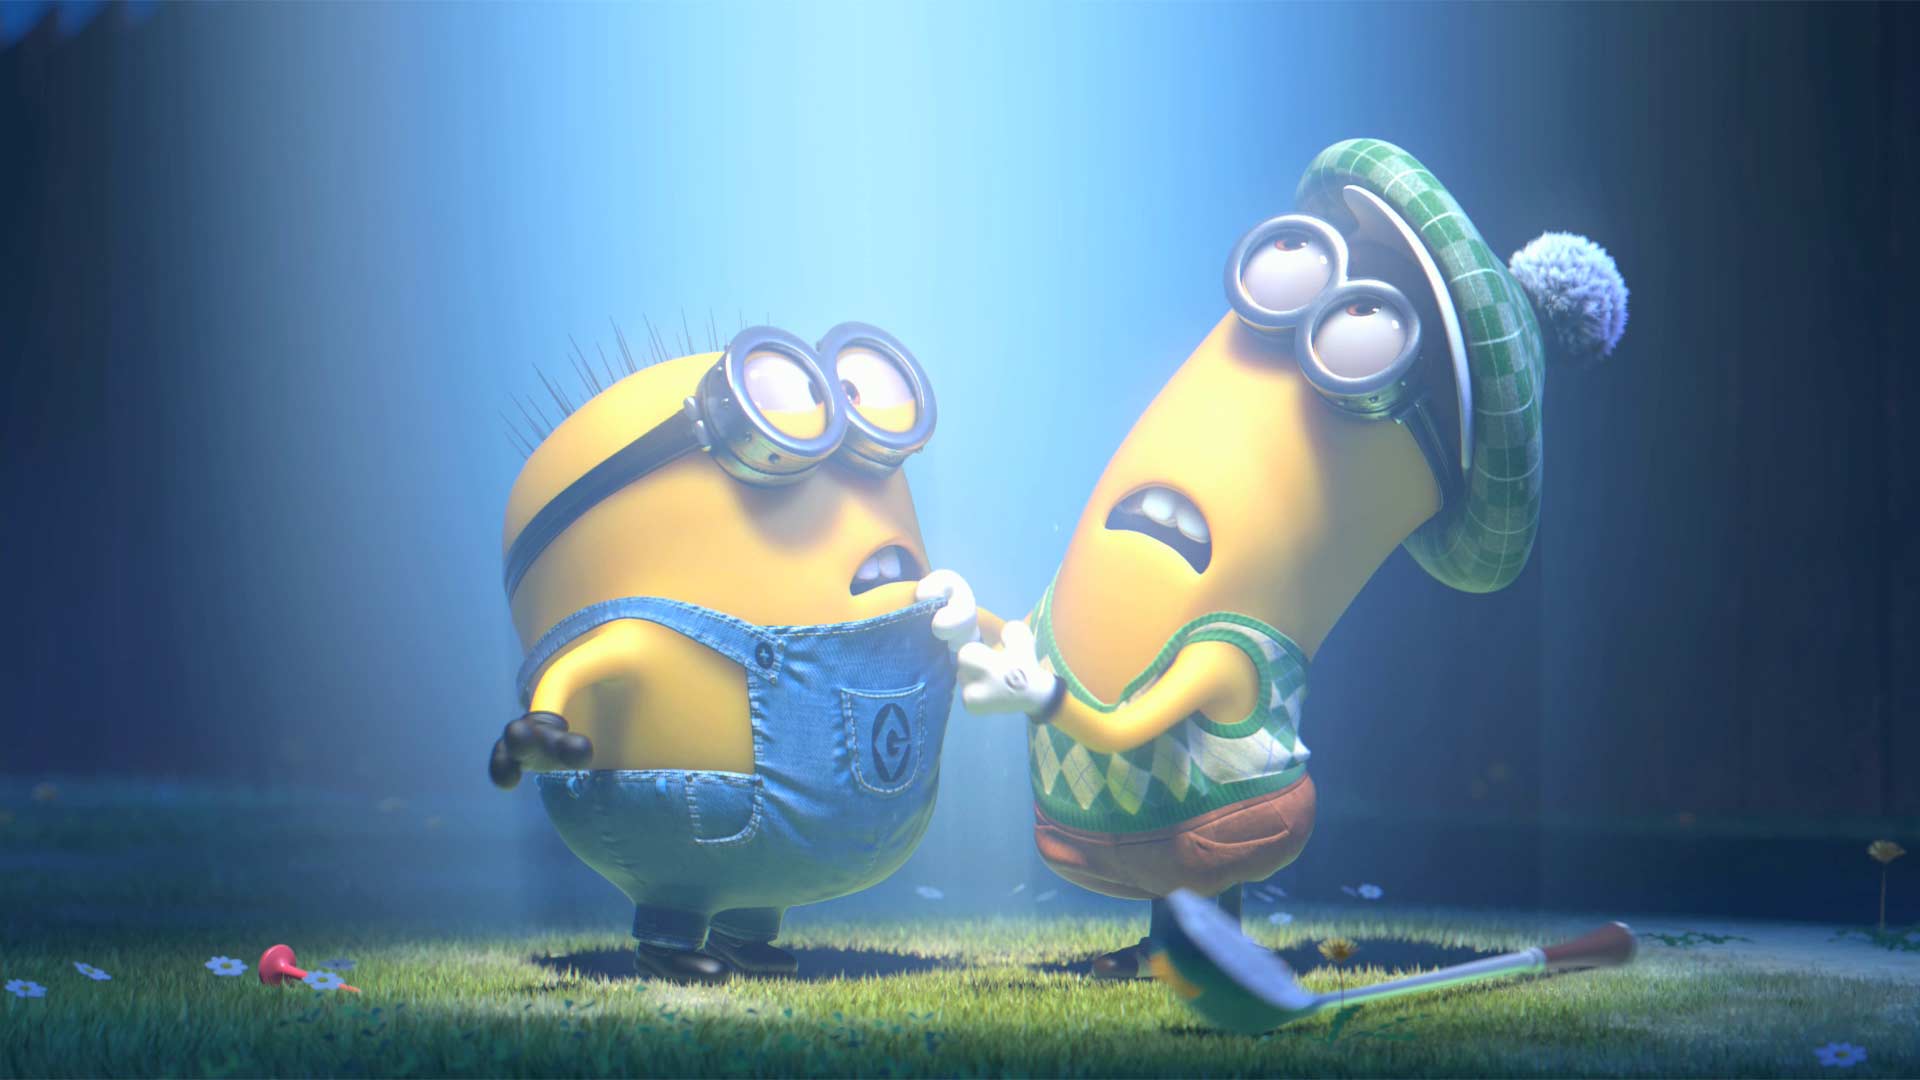 HD Despicable Me 2 Wallpapers & Desktop Backgrounds | Movie Wallpapers